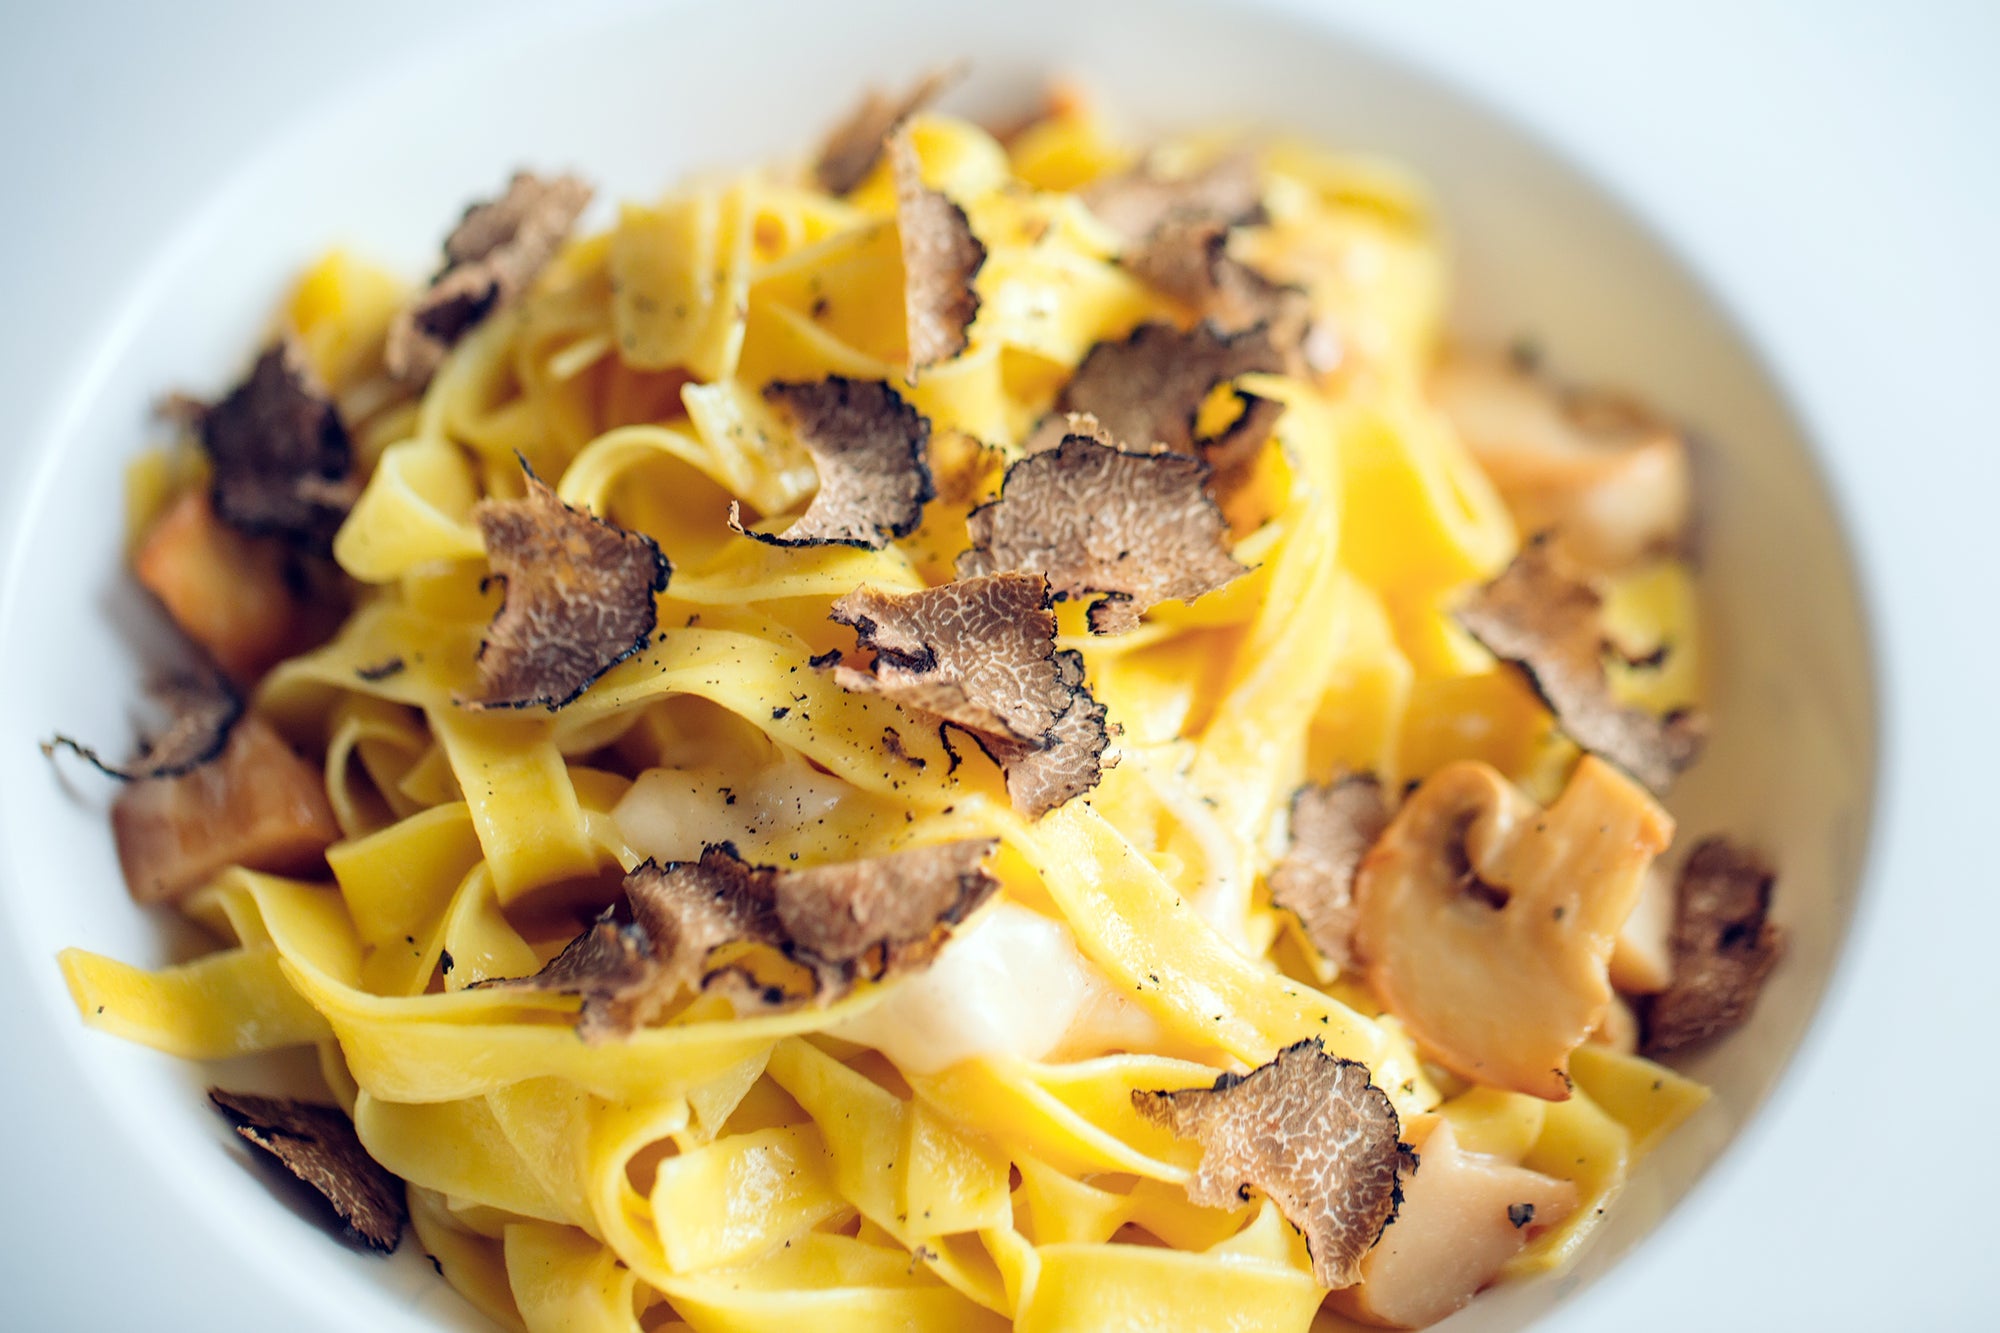 What’s the Difference Between Black and White Truffles?